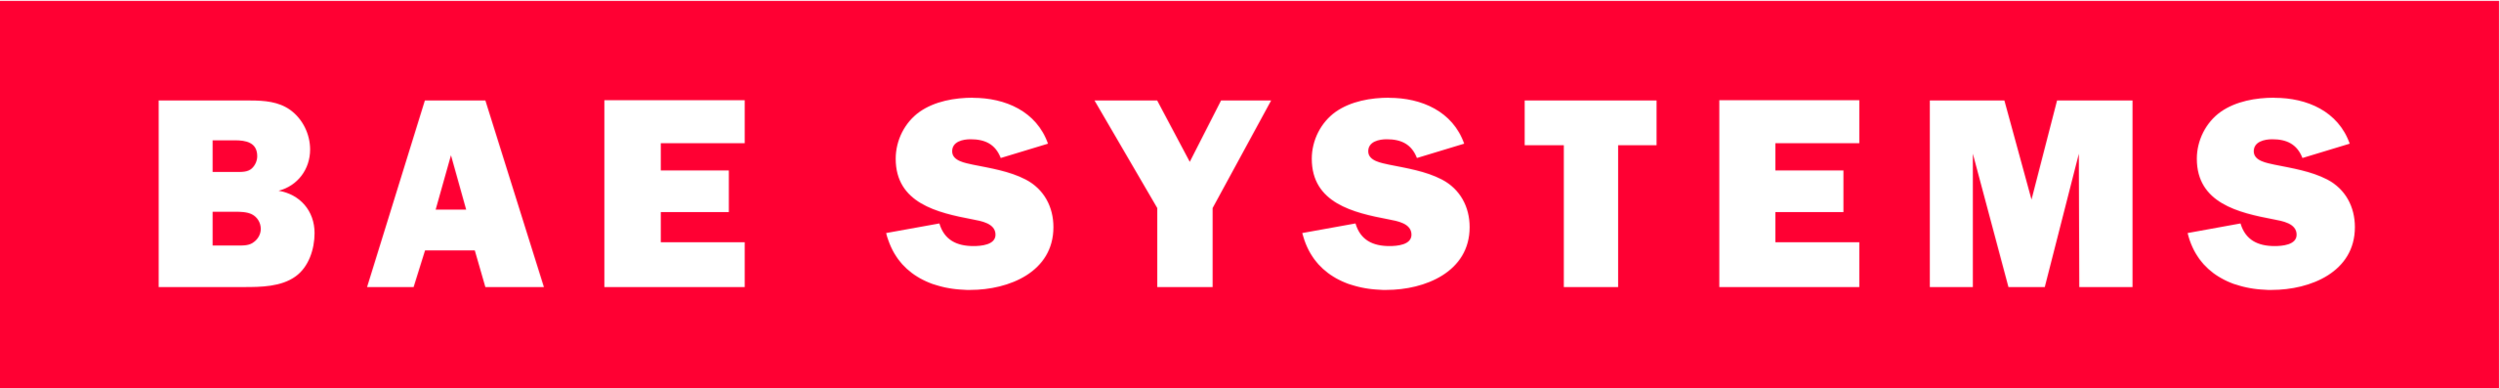 BAE_Systems_logo.svg.png